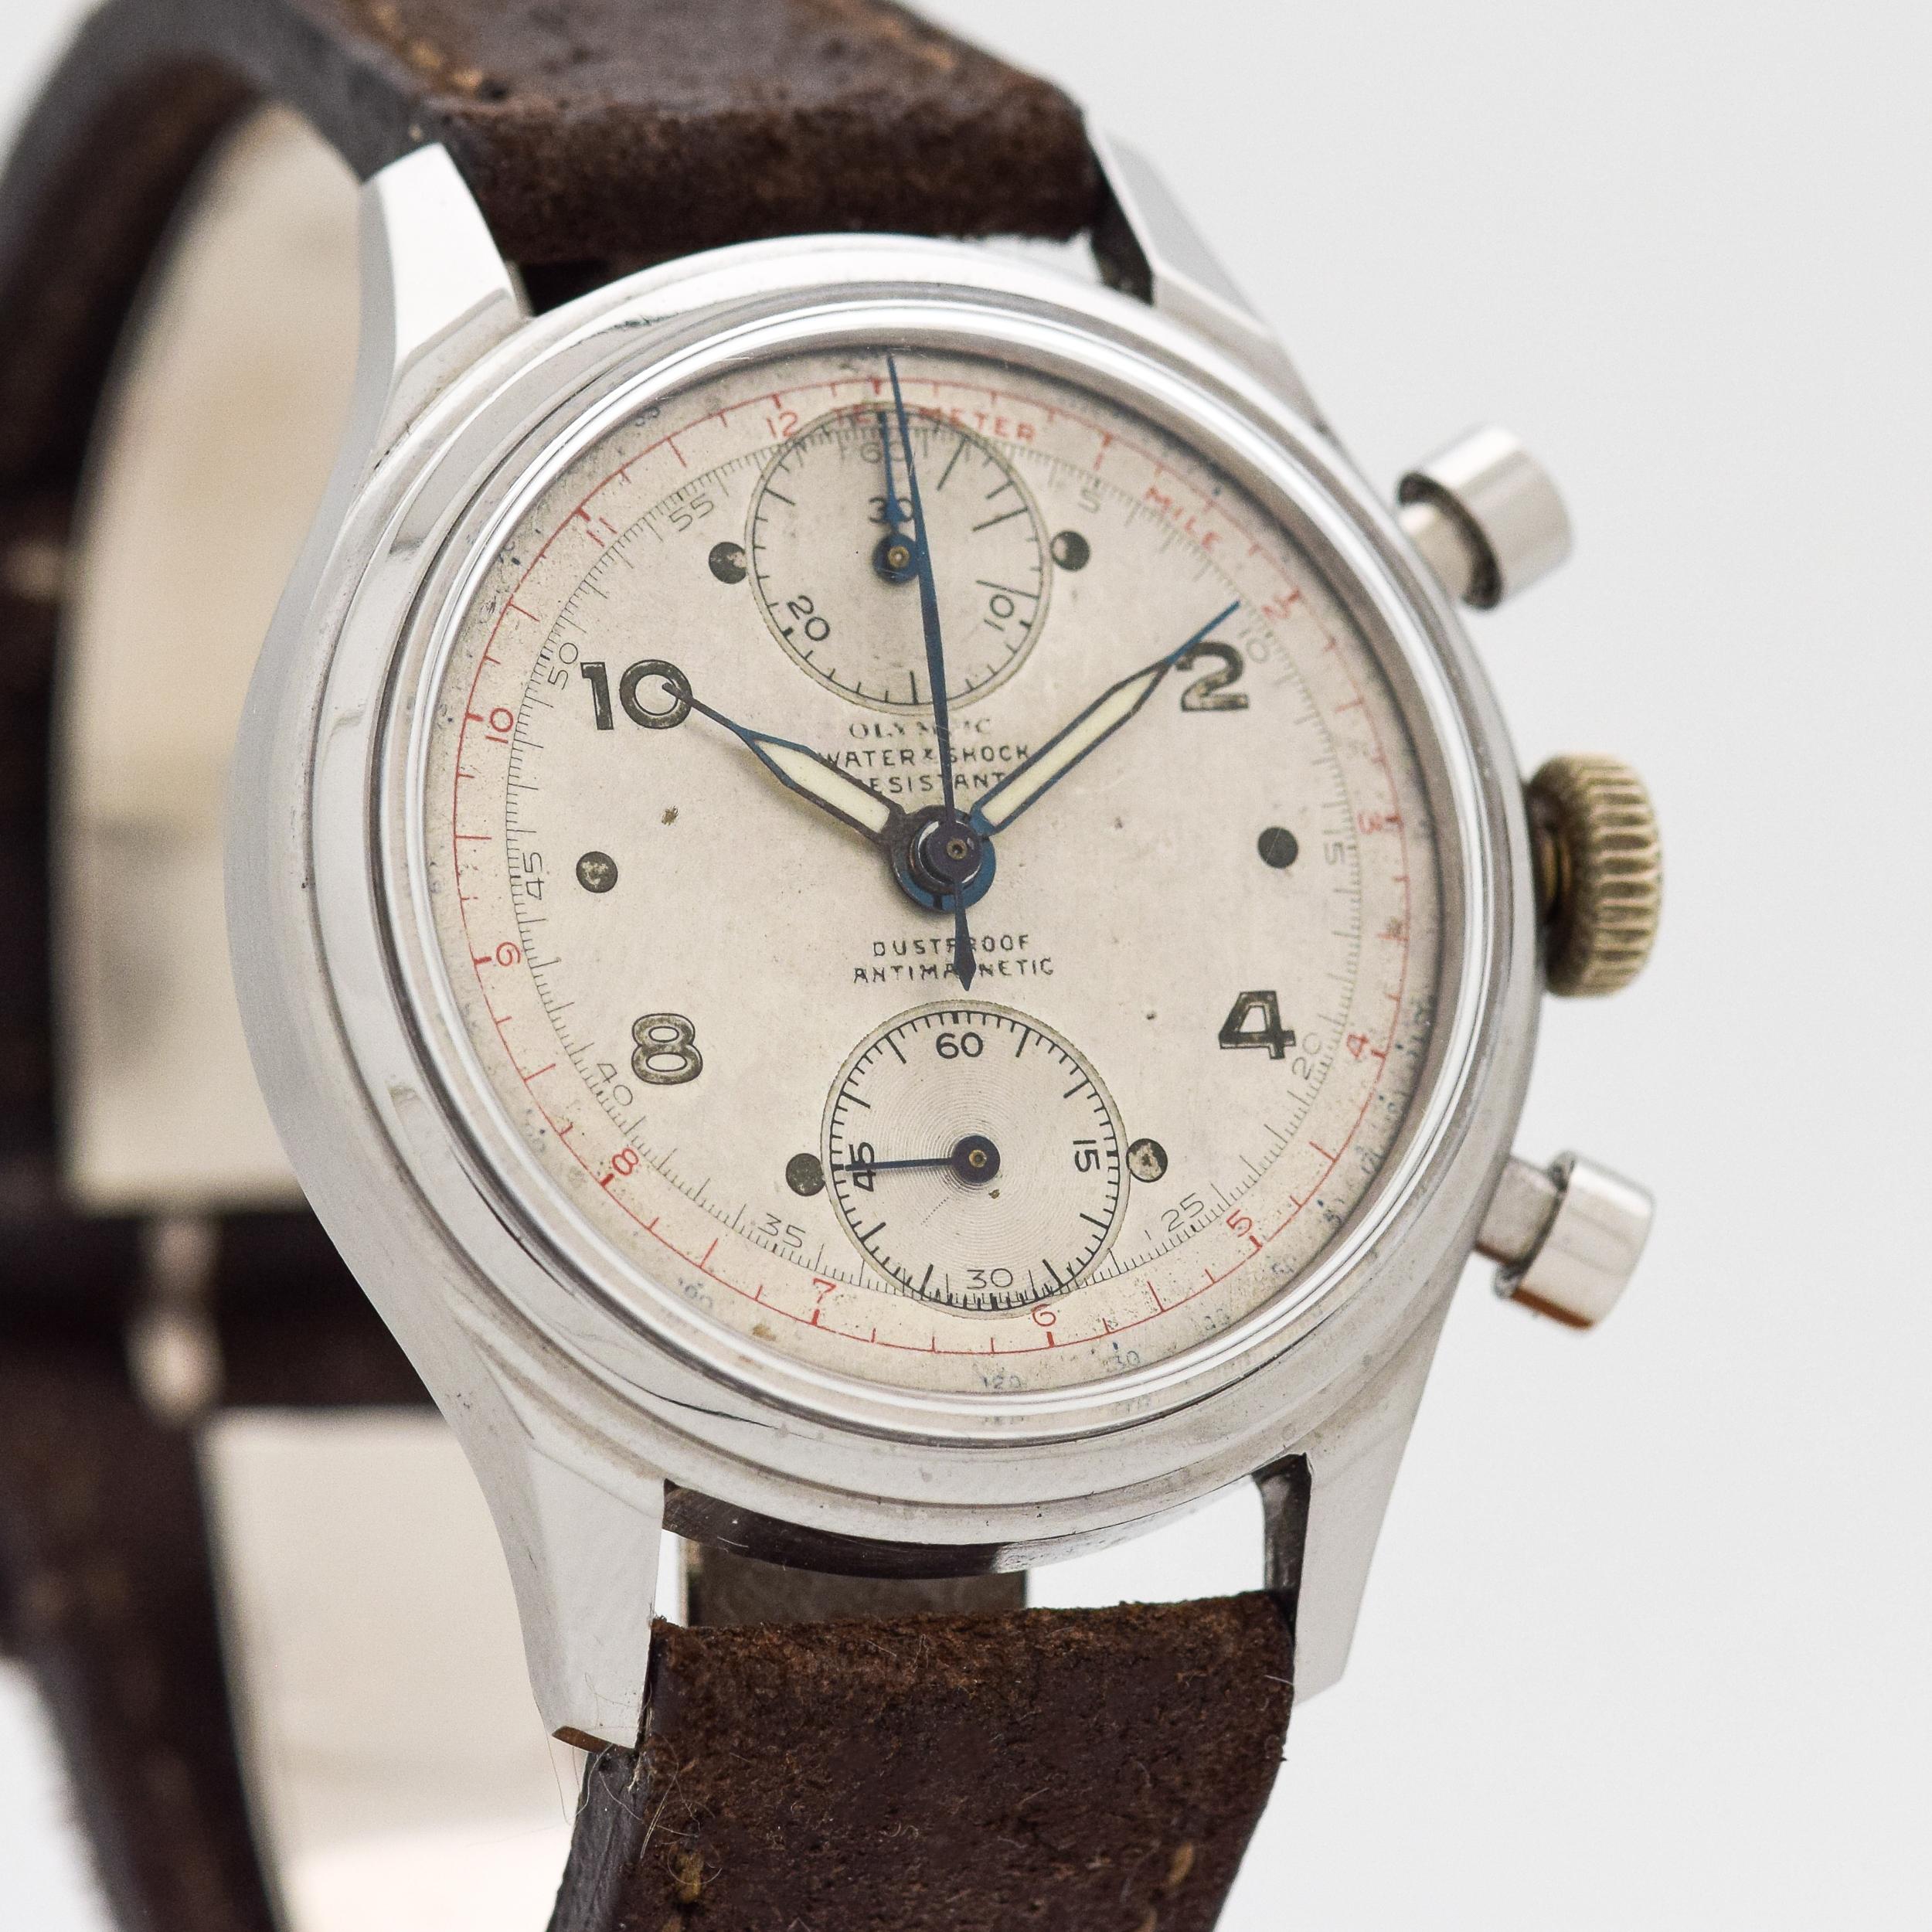 1950's Vintage Olympic 2 Resister Chronograph Stainless Steel watch with Original Silver Dial with Luminous Arabic 2, 4, 8, 10, and 12 Markers. 36mm x 43mm lug to lug (1.42 in. x 1.69 in.) - 17 jewel, manual caliber movement. Equipped with a Triple